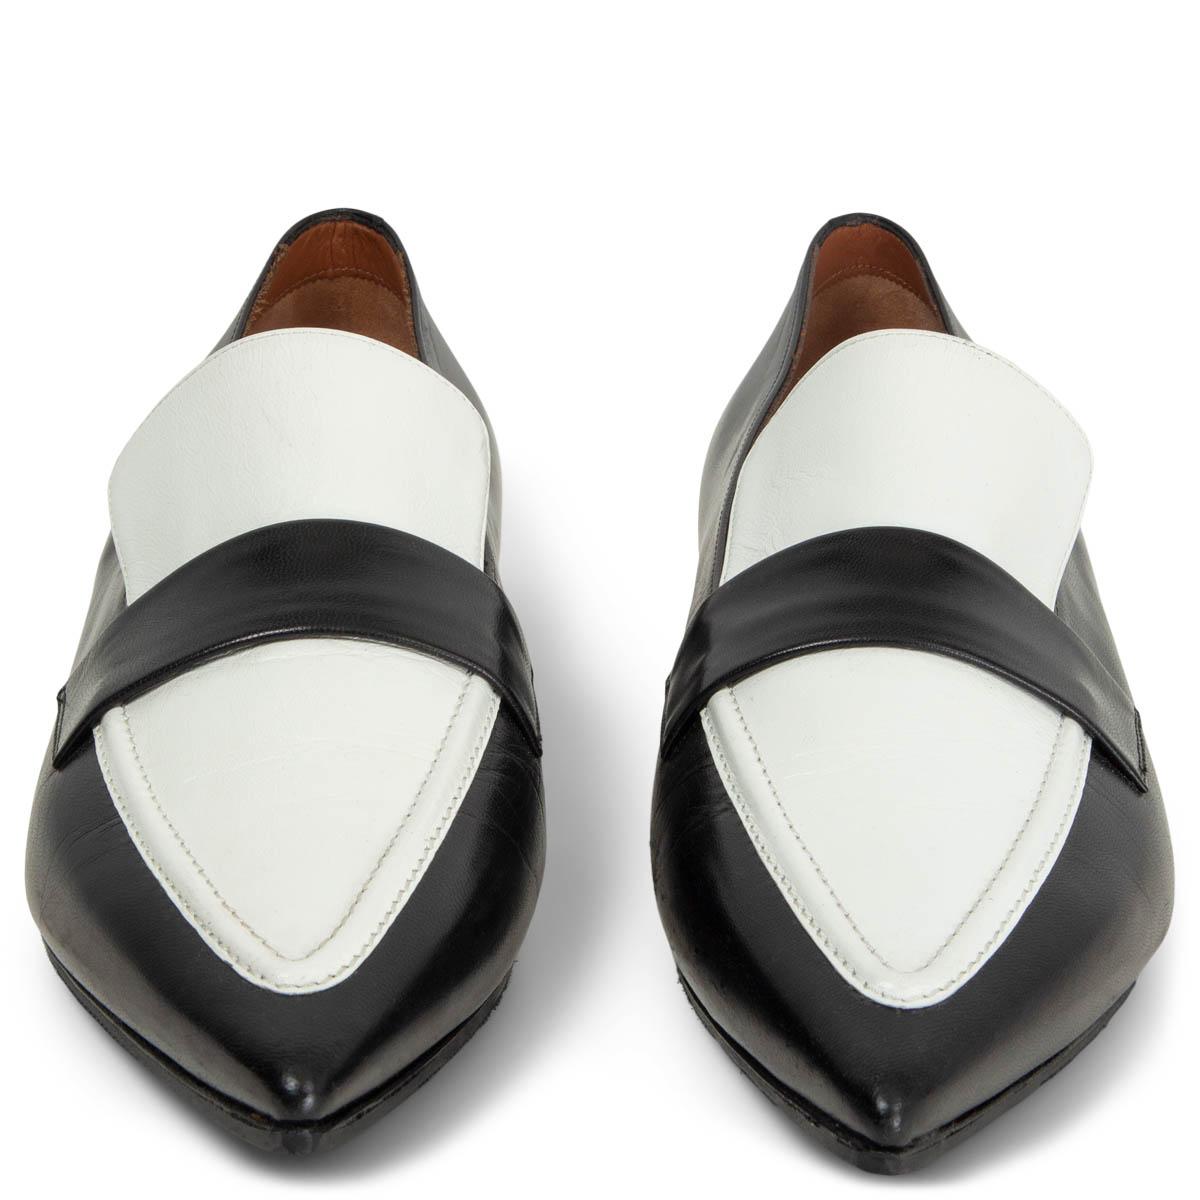 100% authentic Céline pointed-toe loafers in black and white smooth calfskin. Have been worn once or twice and are in excellent condition. Rubber sole has been added. 

Measurements
Imprinted Size	41
Shoe Size	41
Inside Sole	27cm (10.5in)
Width	8cm